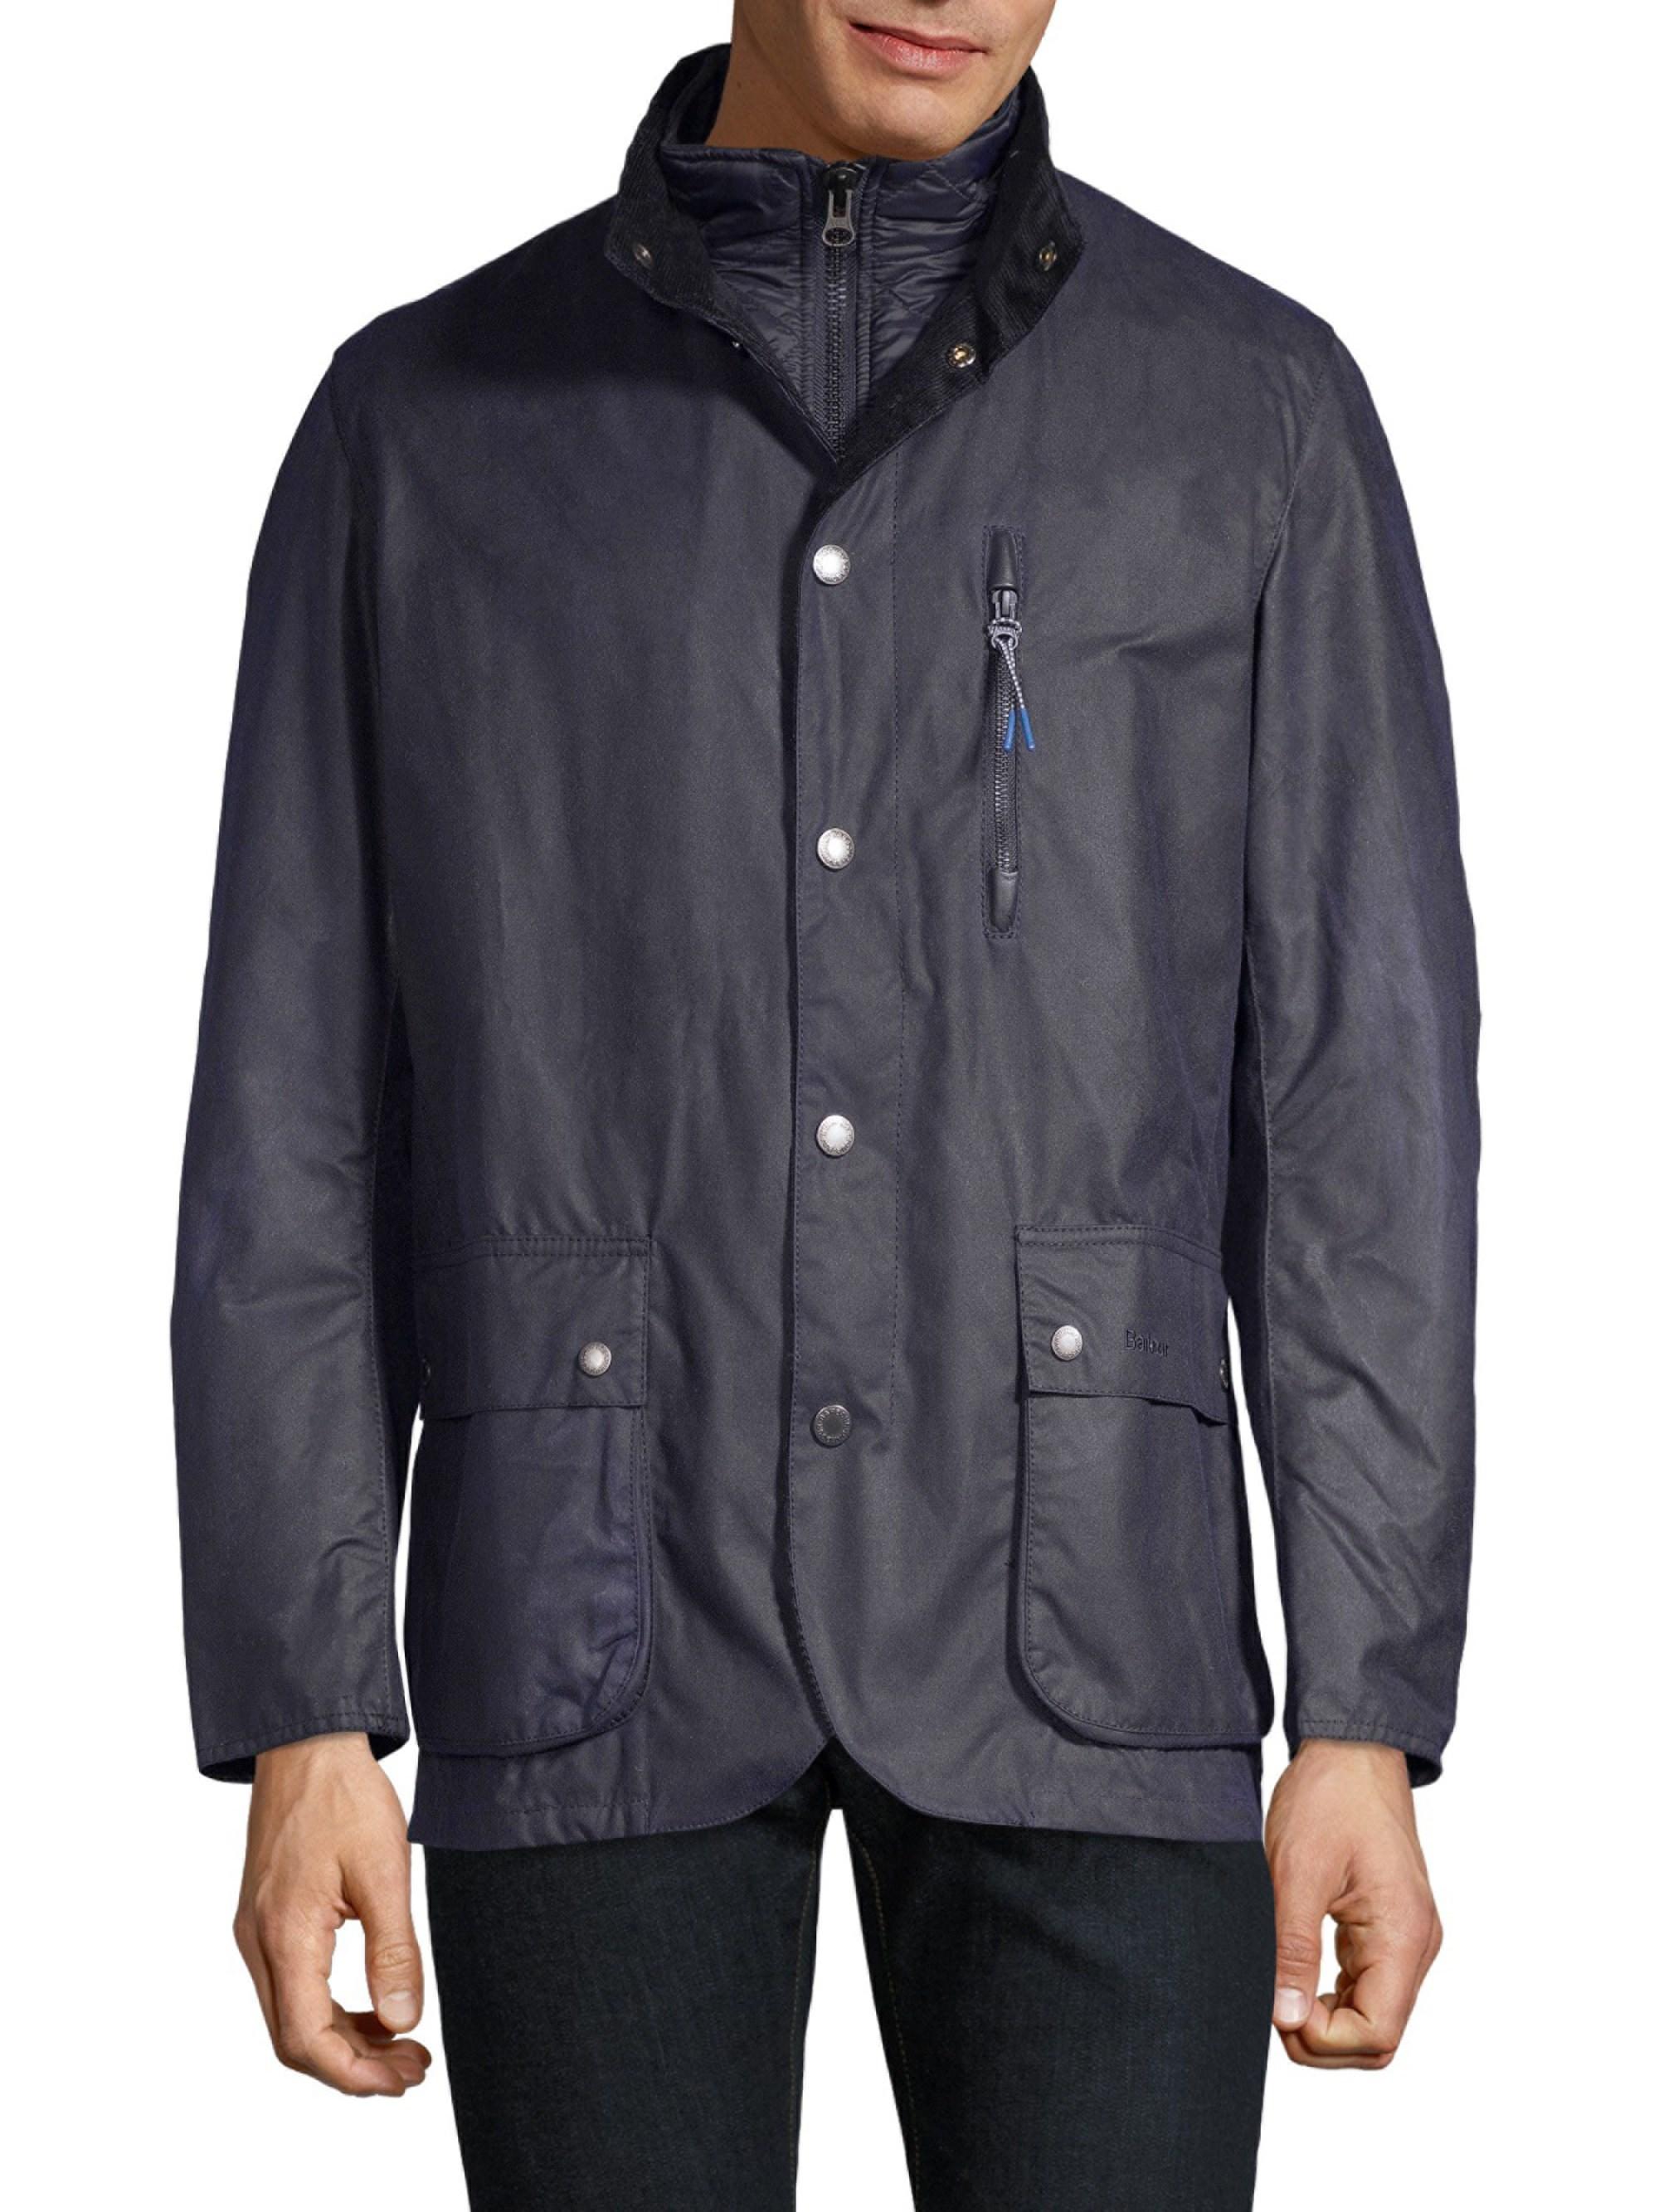 Barbour Surge Waxed Cotton Jacket in Blue for Men - Lyst